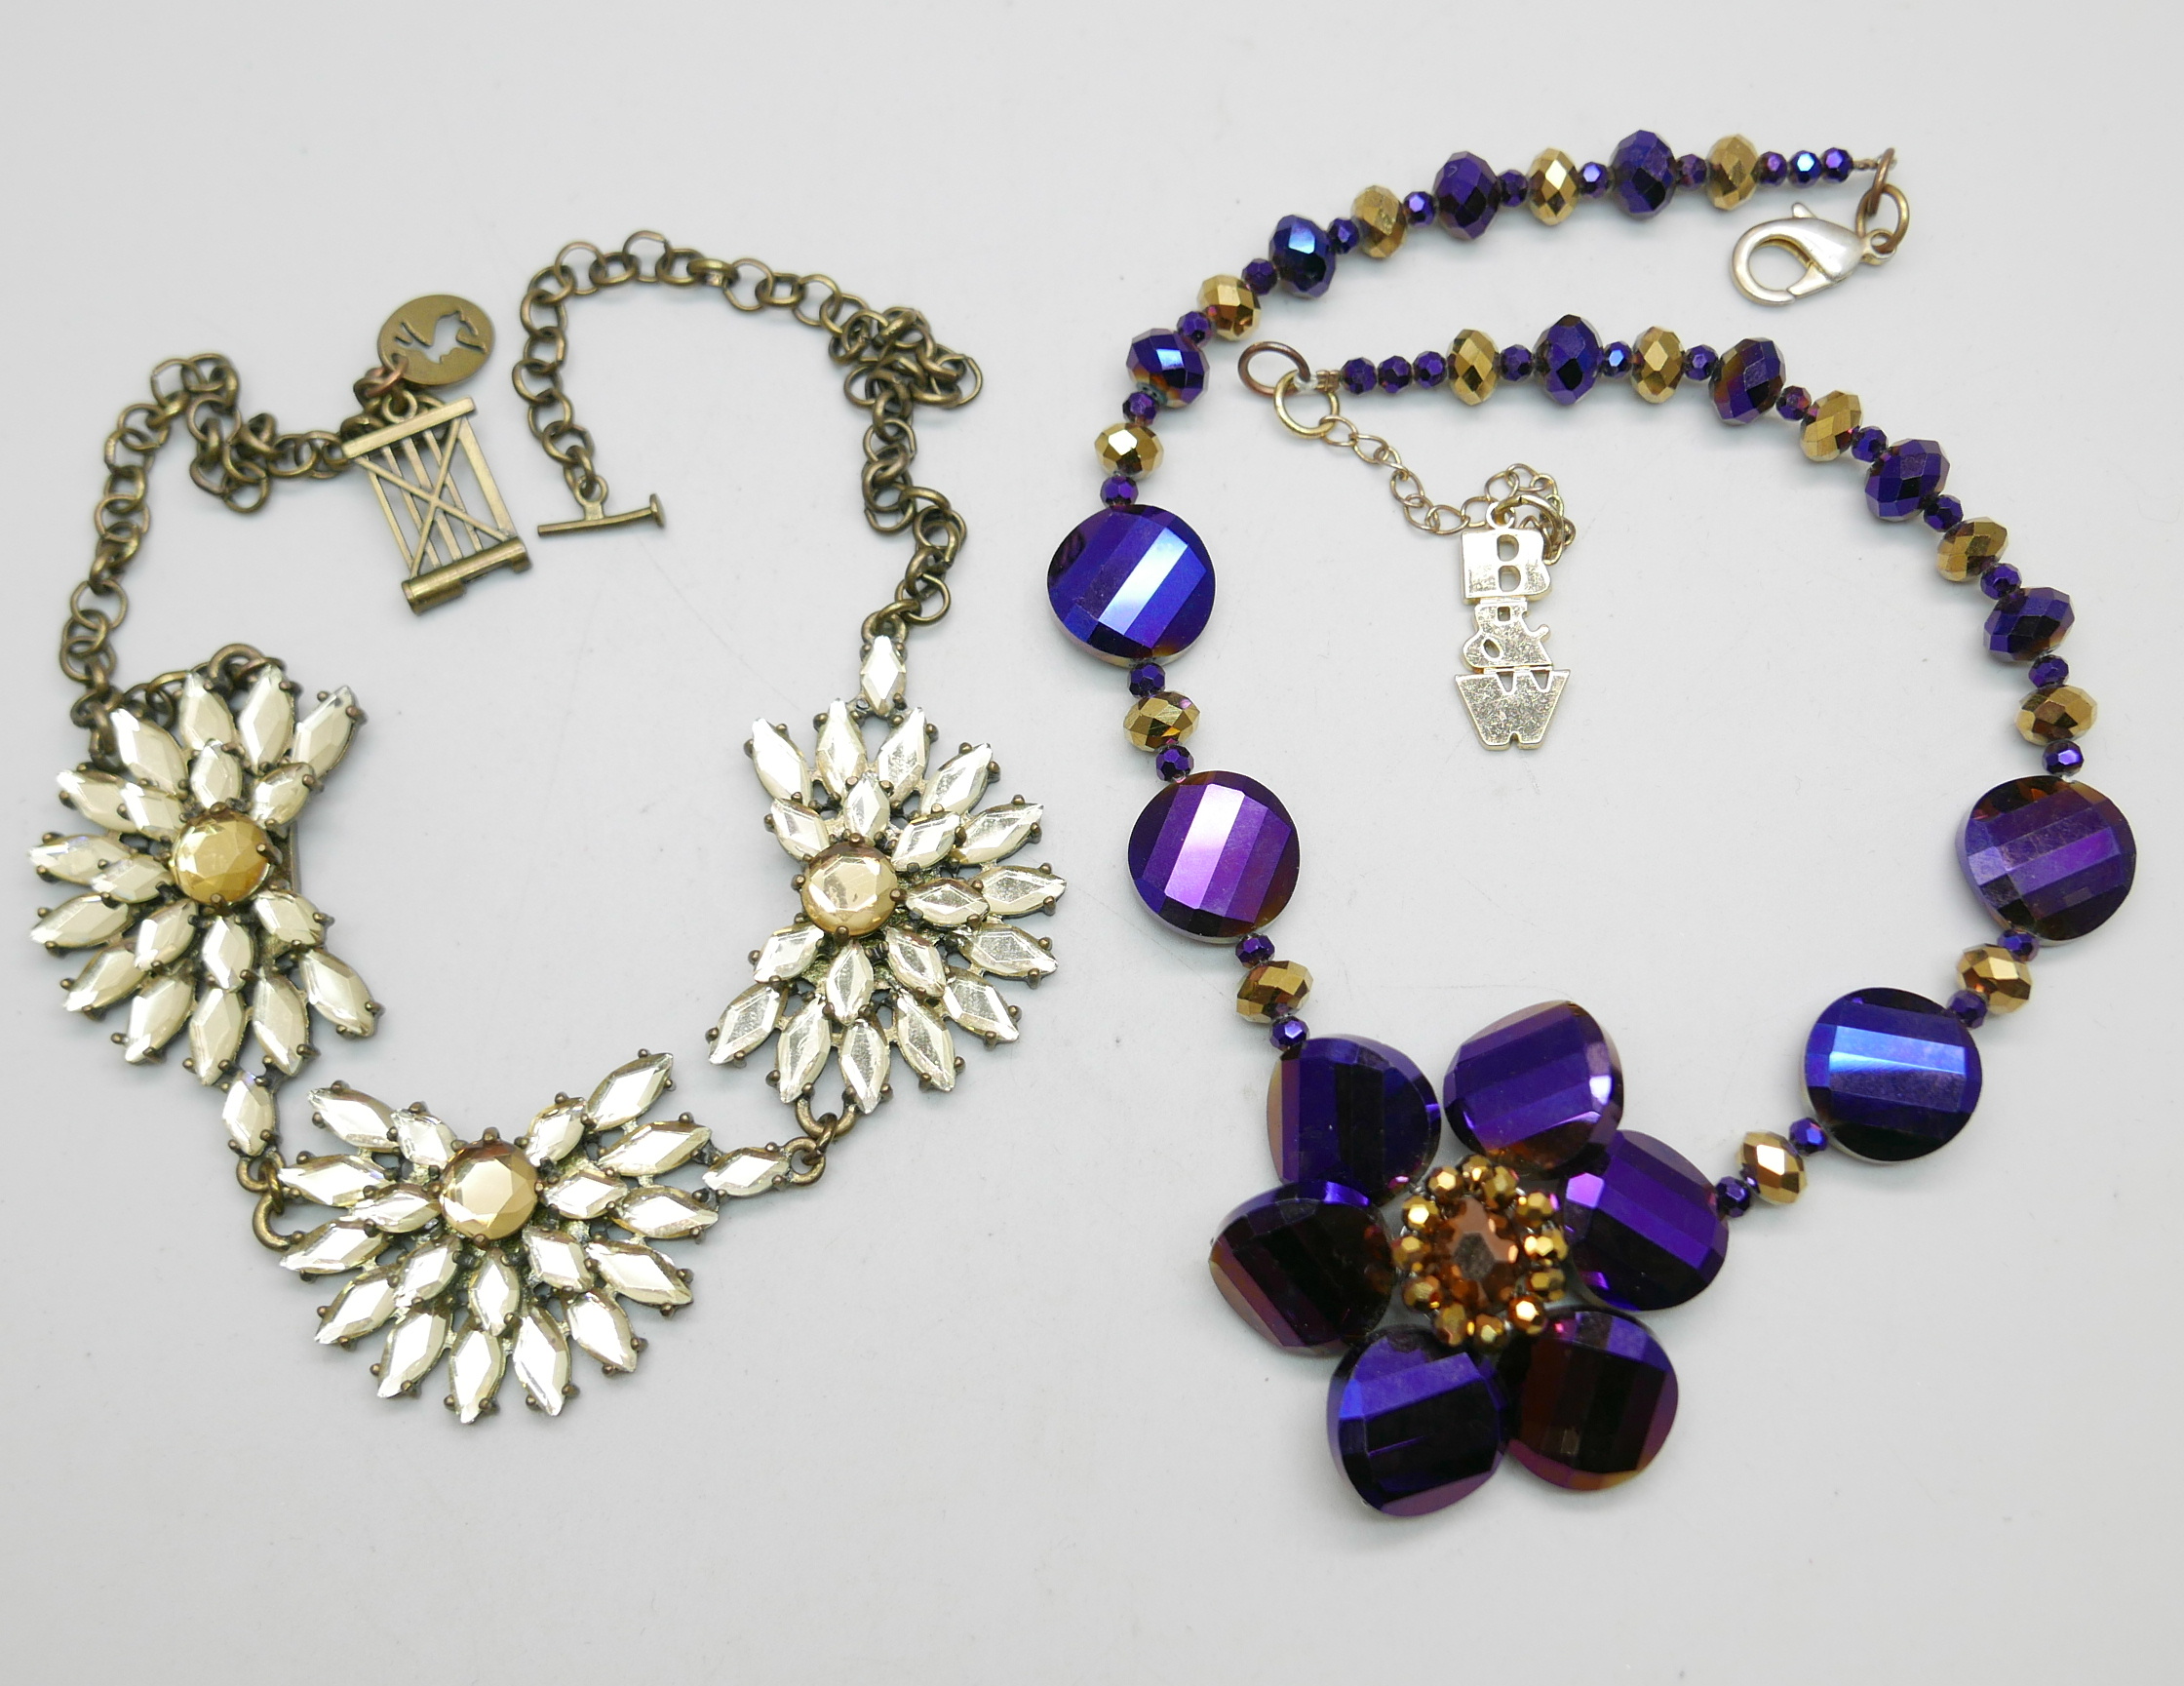 A Butler and Wilson Purple and Gold necklace and a Joules rhinestone three flower necklace